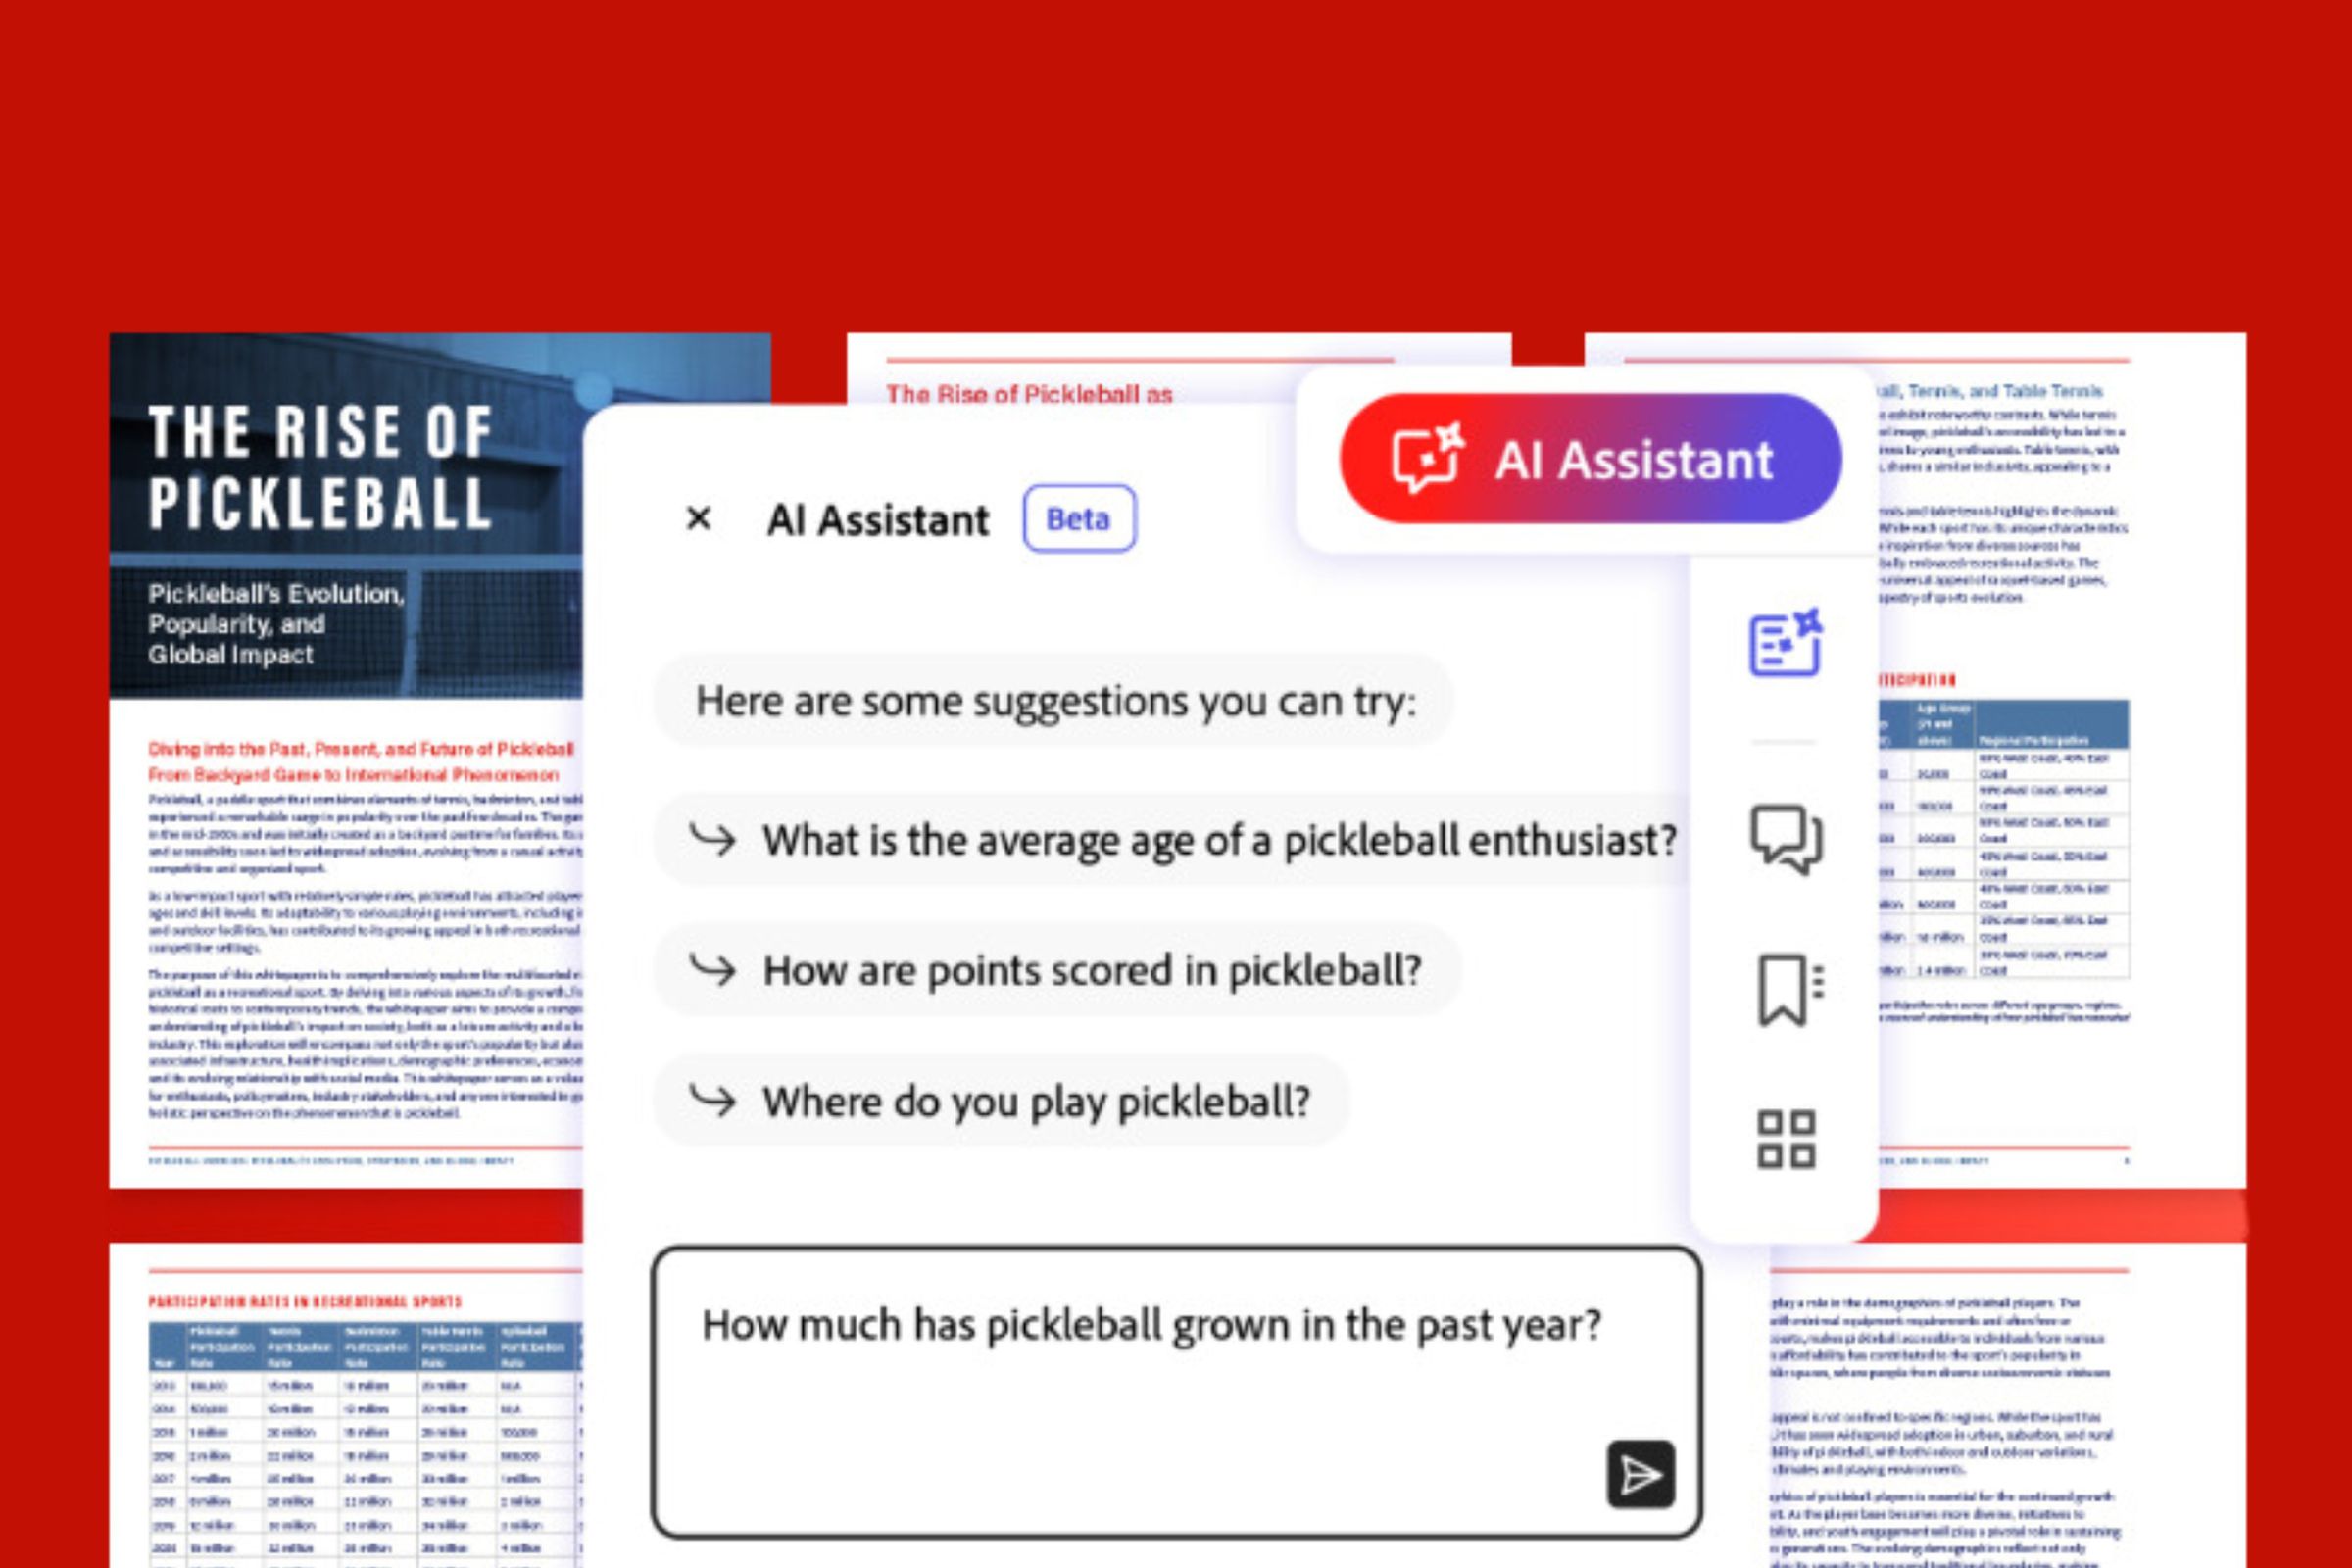 A screenshot taken of Adobe Acrobat’s AI Assistant suggesting questions about pickleball.